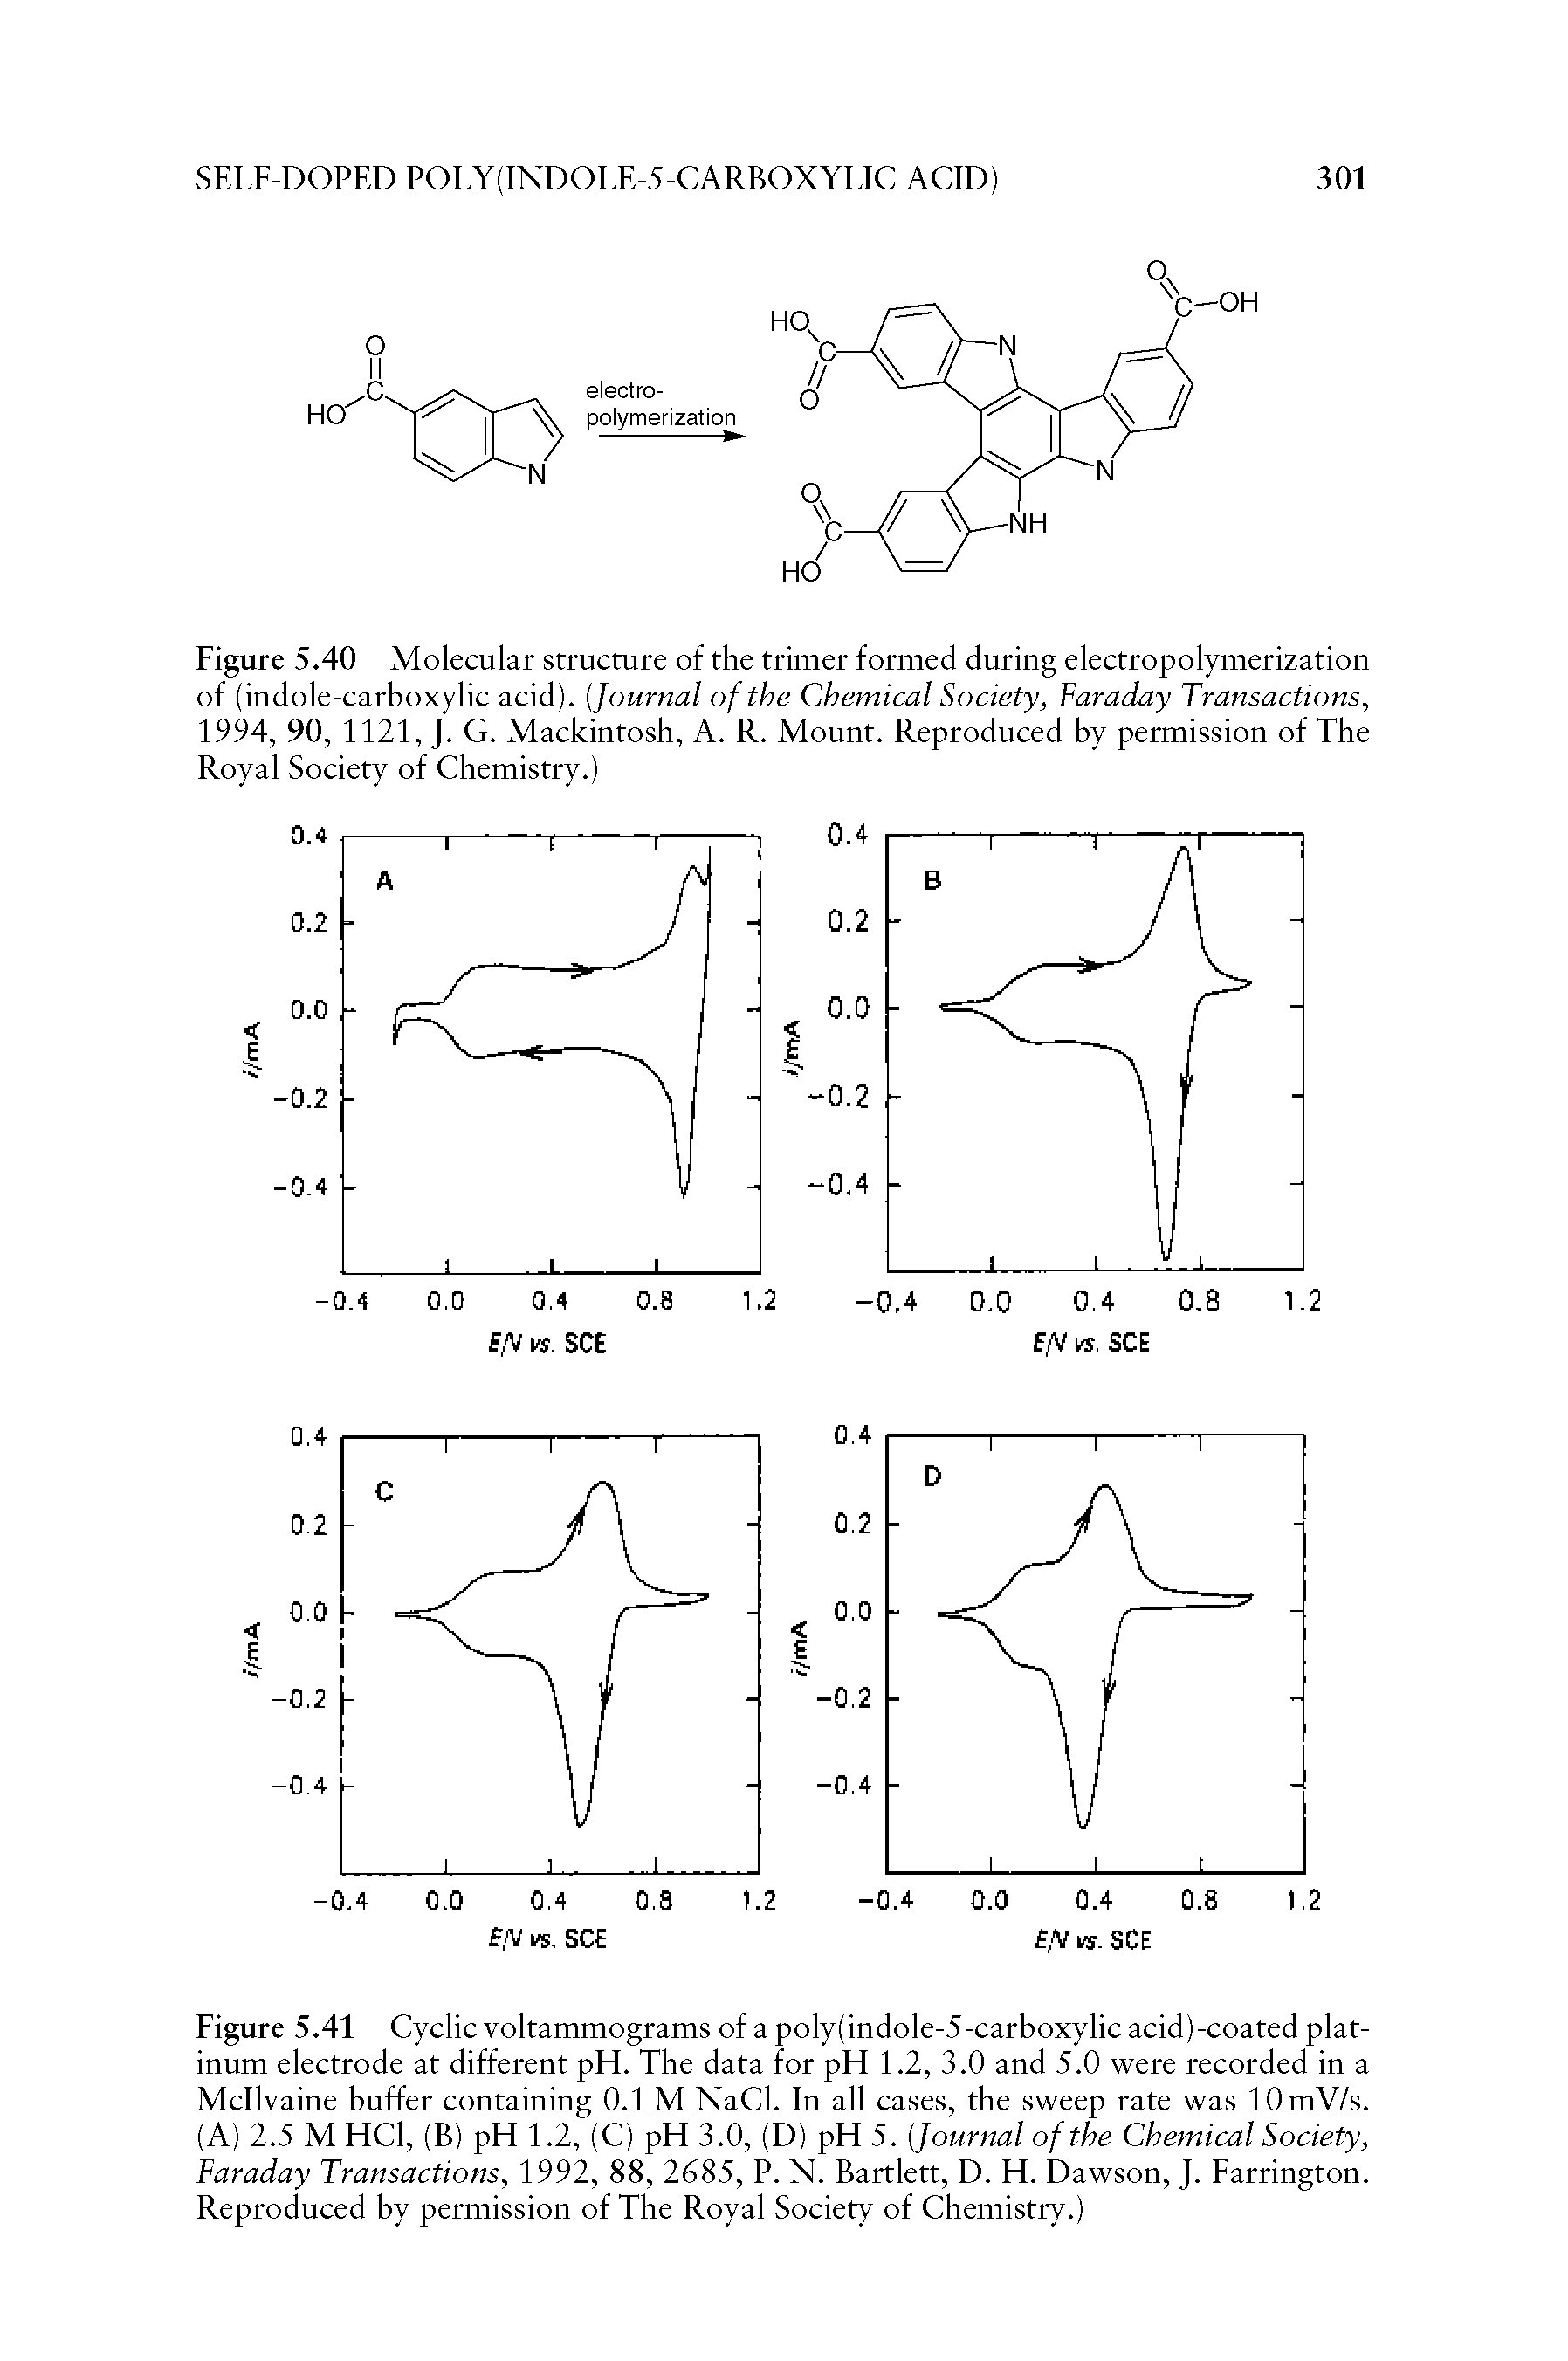 Figure 5.41 Cyclic voltammograms of a poly(indole-5-carboxylic acid)-coated platinum electrode at different pH. The data for pH 1.2, 3.0 and 5.0 were recorded in a Mcllvaine buffer containing 0.1 M NaCl. In all cases, the sweep rate was lOmV/s. (A) 2.5 M HCl, (B) pH 1.2, (C) pH 3.0, (D) pH 5. Journal of the Chemical Society, Faraday Transactions, 1992, 88, 2685, P. N. Bartlett, D. H. Dawson, J. Farrington. Reproduced by permission of The Royal Society of Chemistry.)...